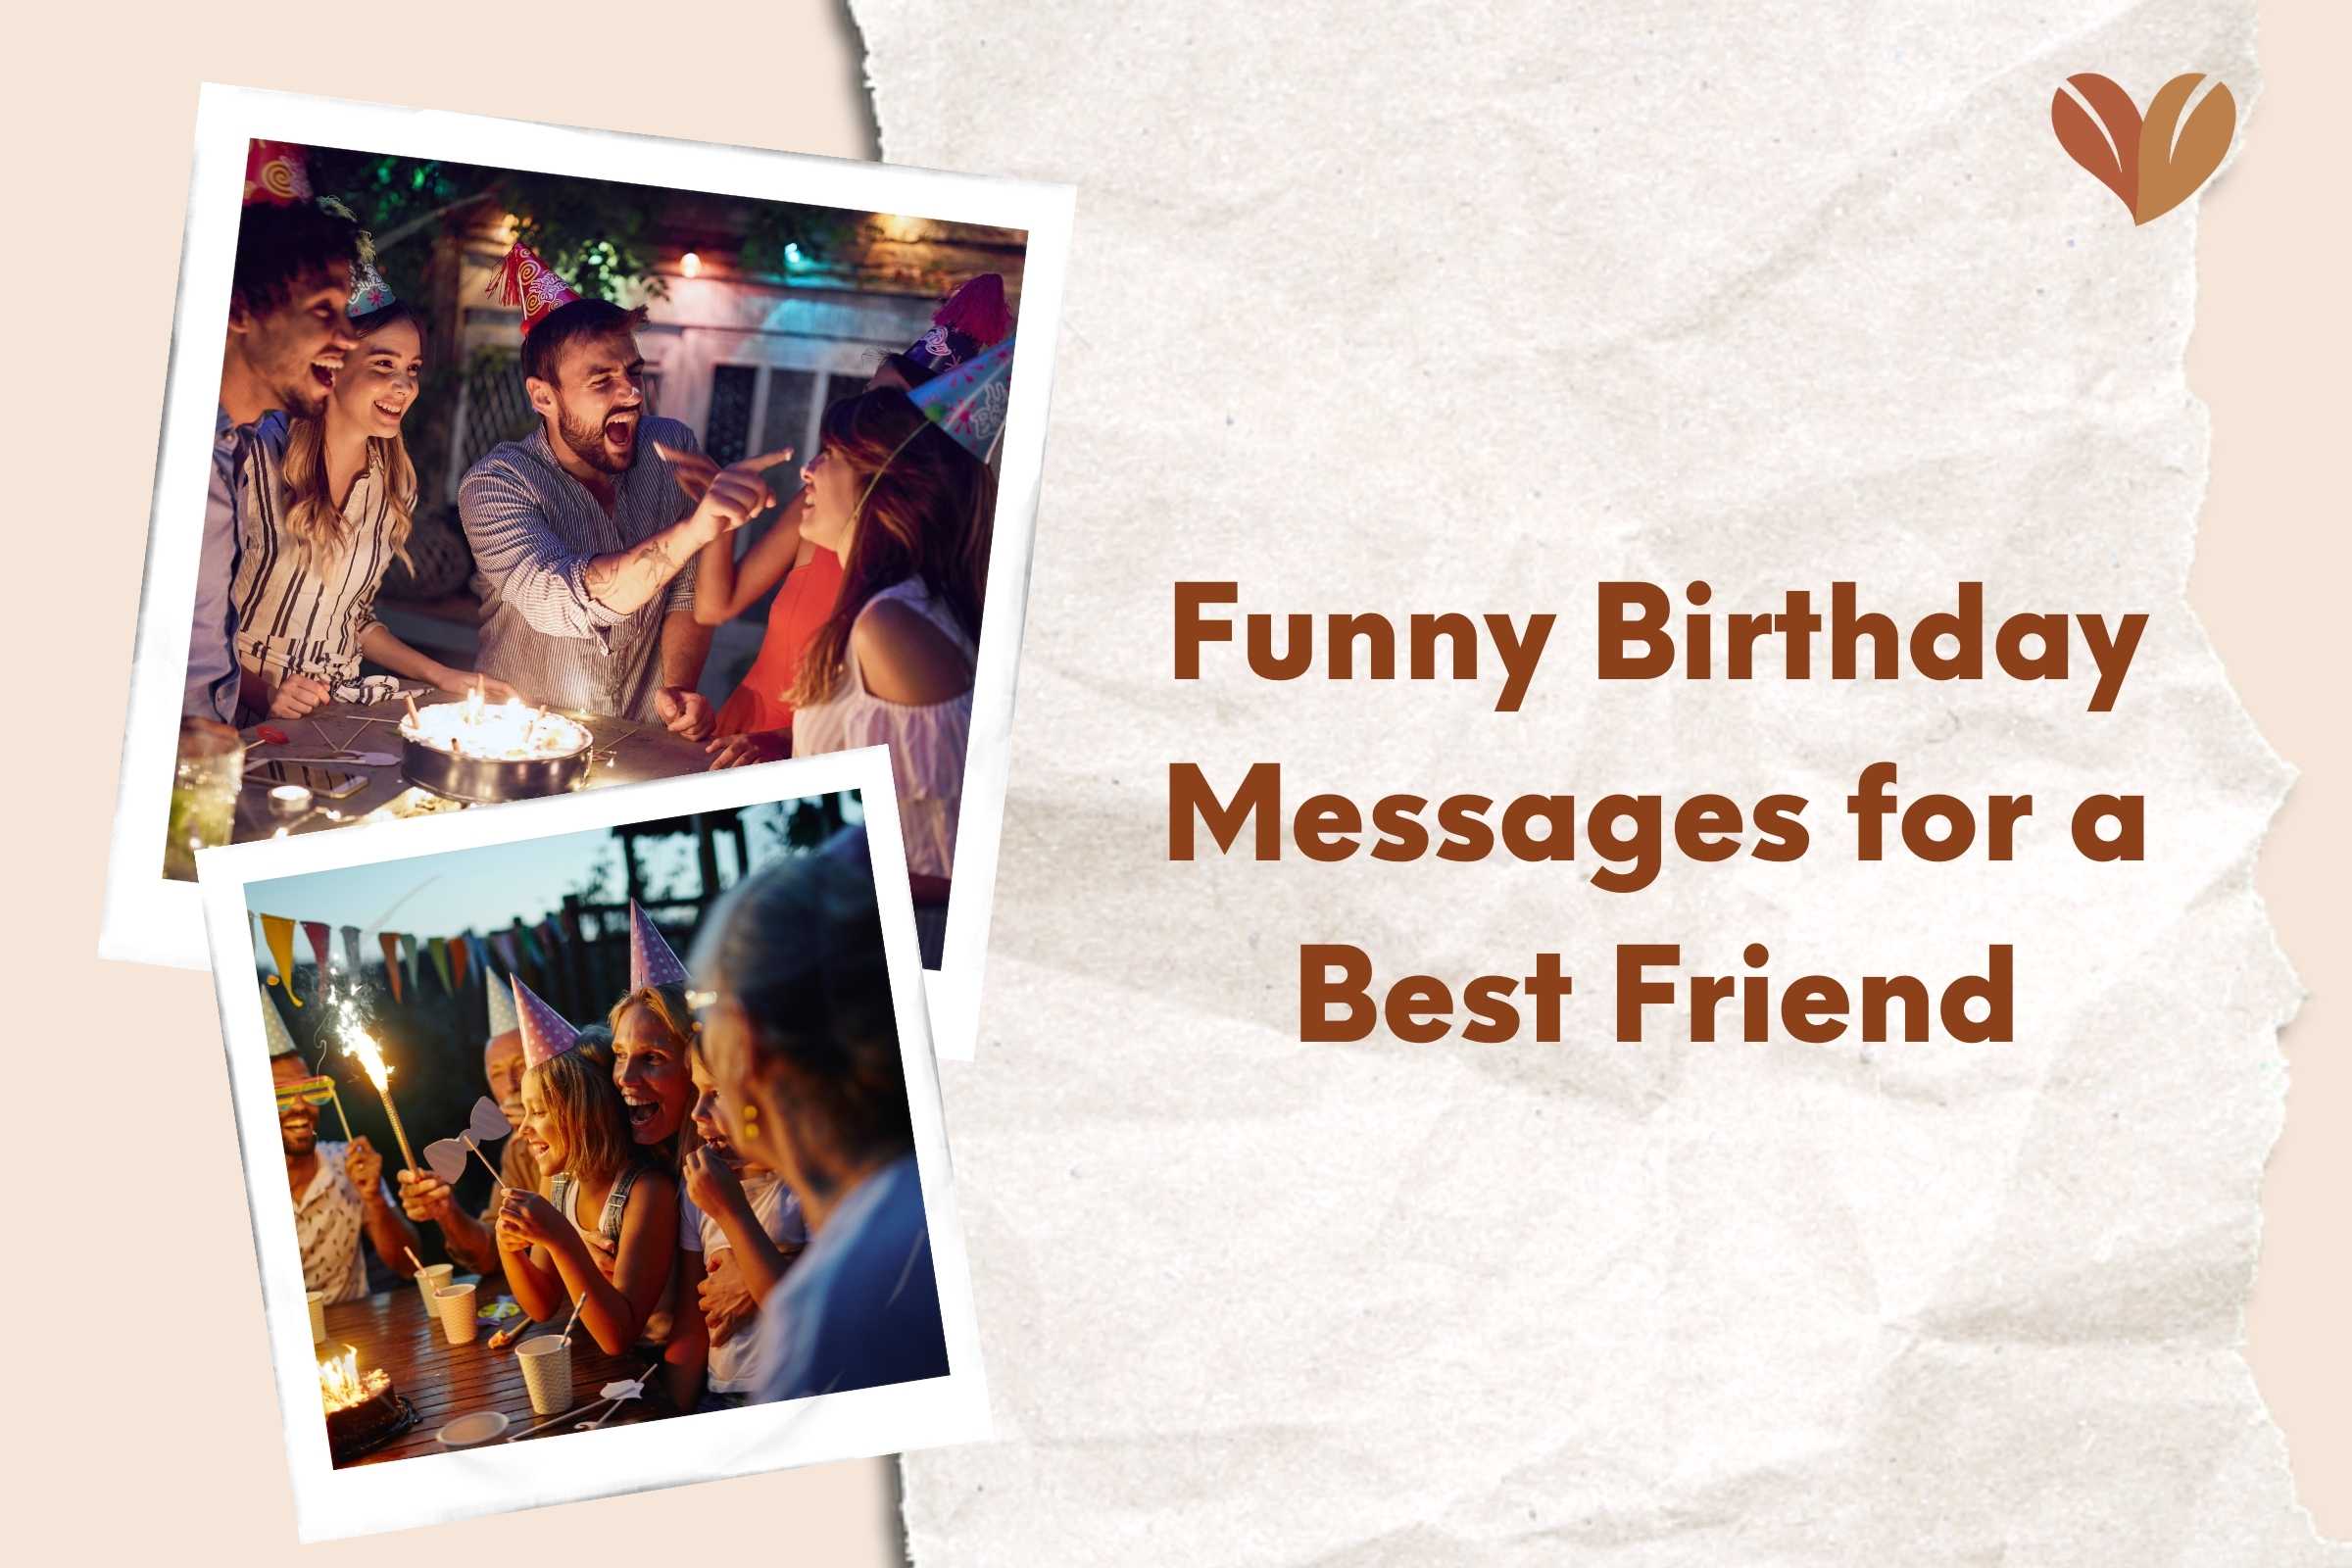 Celebrating with a sprinkle of humor and 'birthday wishes for friend,' making memories together.